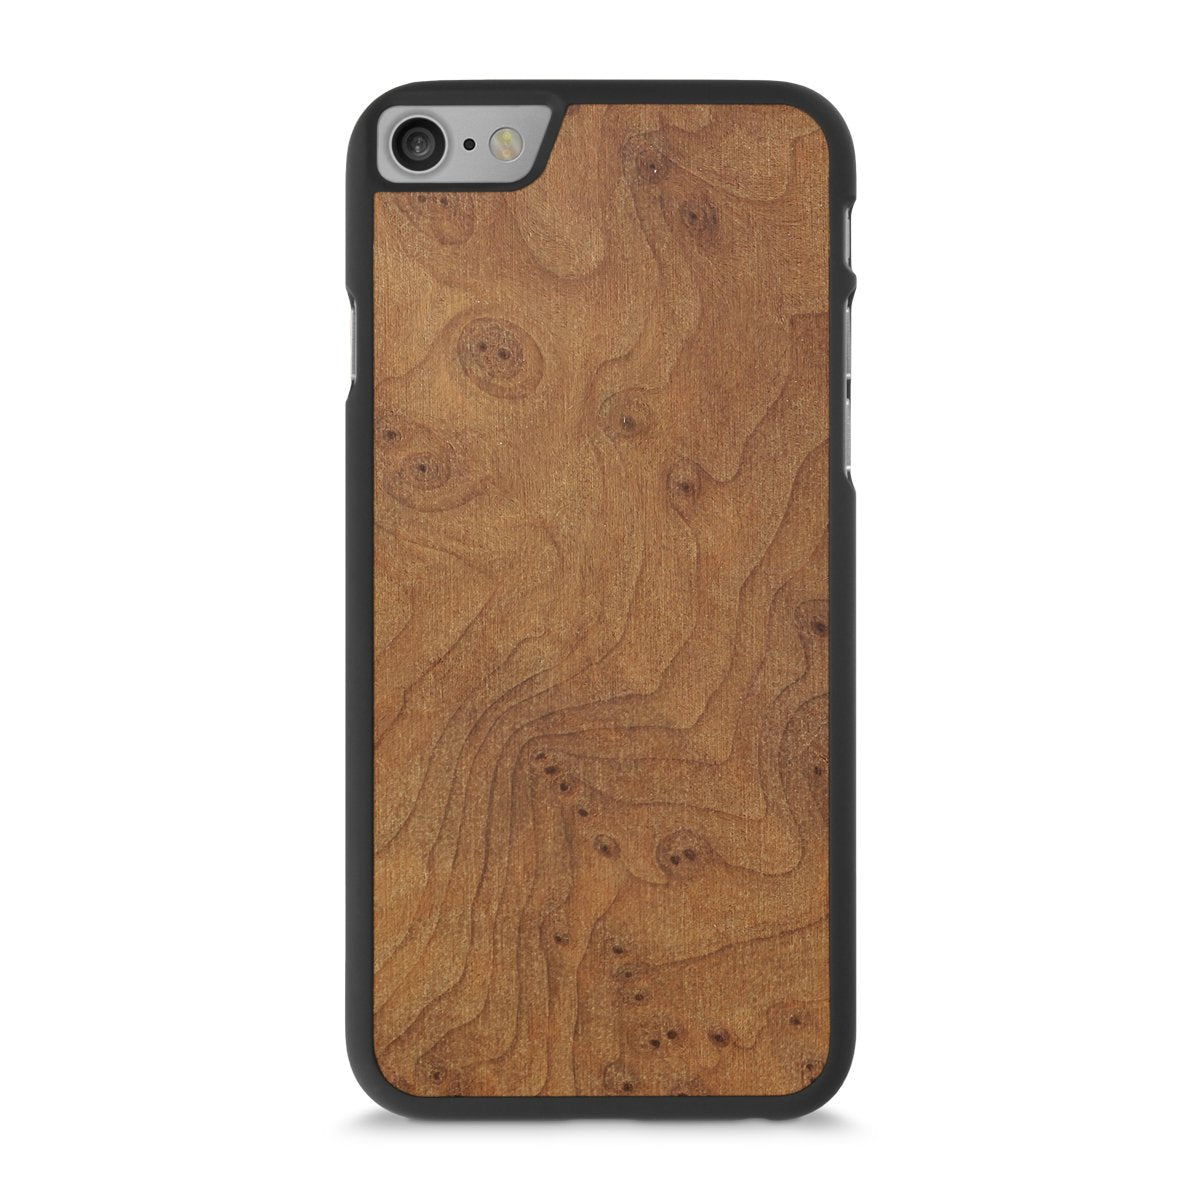 iPhone 8 — #WoodBack Snap Case